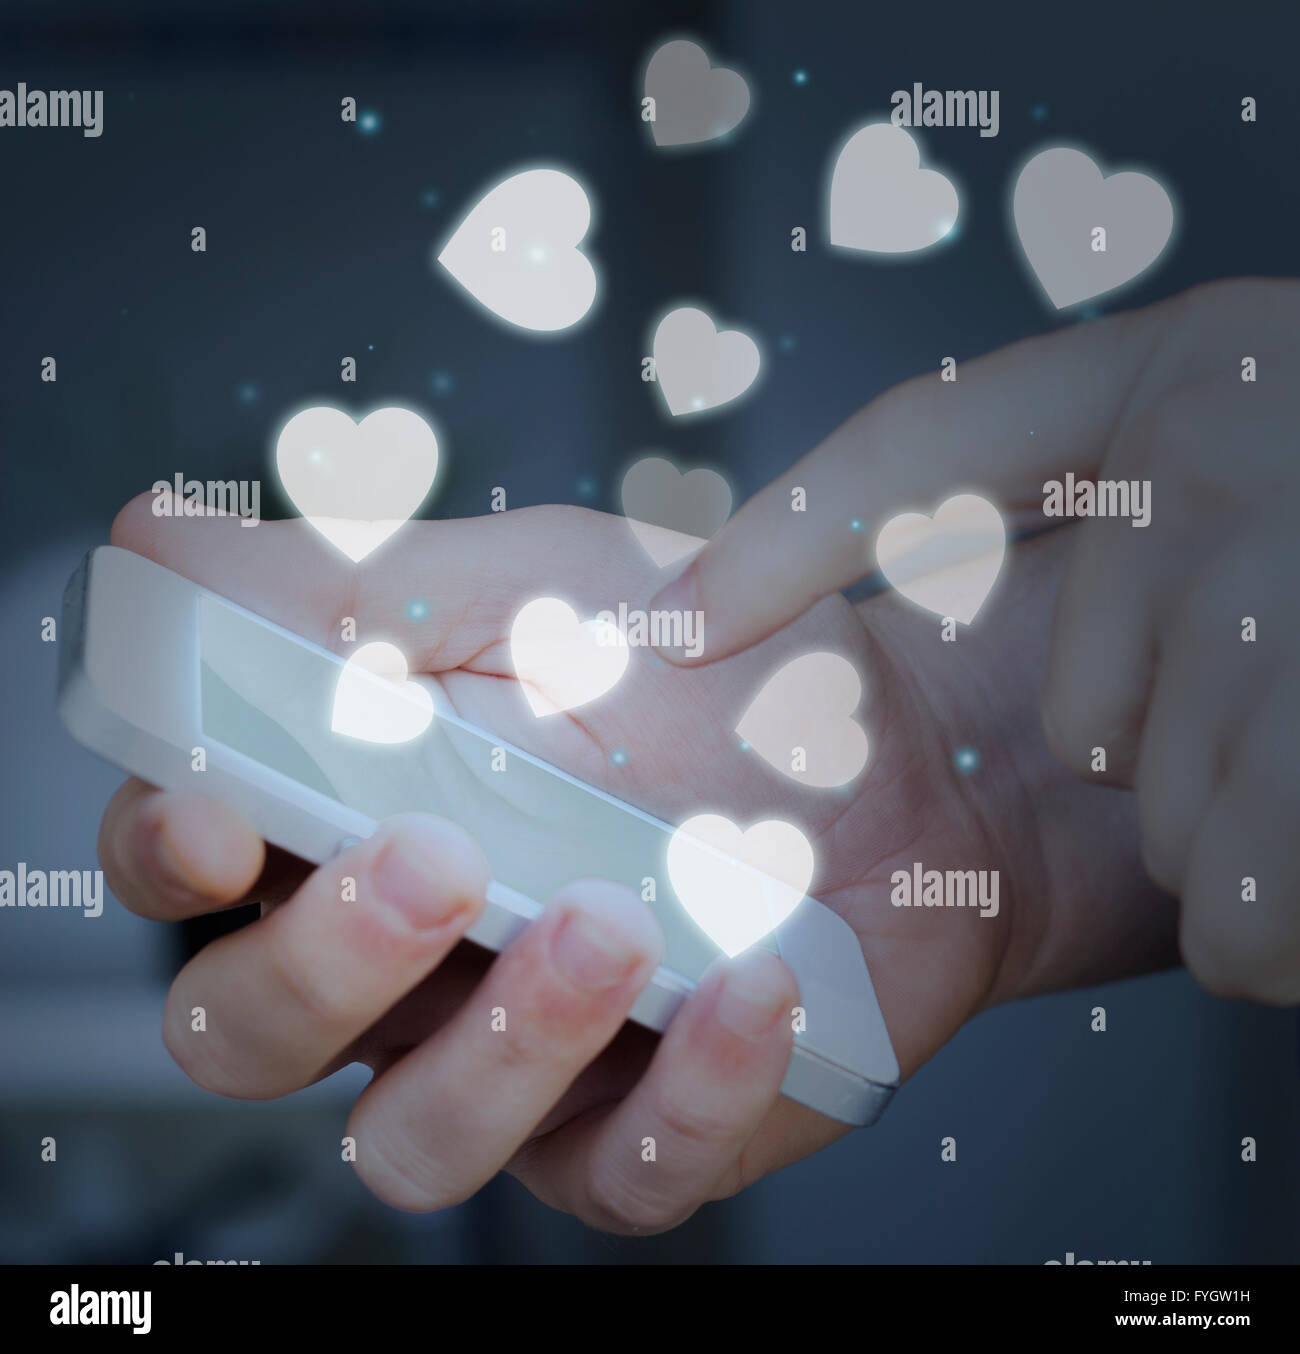 Finger touching a smartphone screen. addiction or love concept. Stock Photo